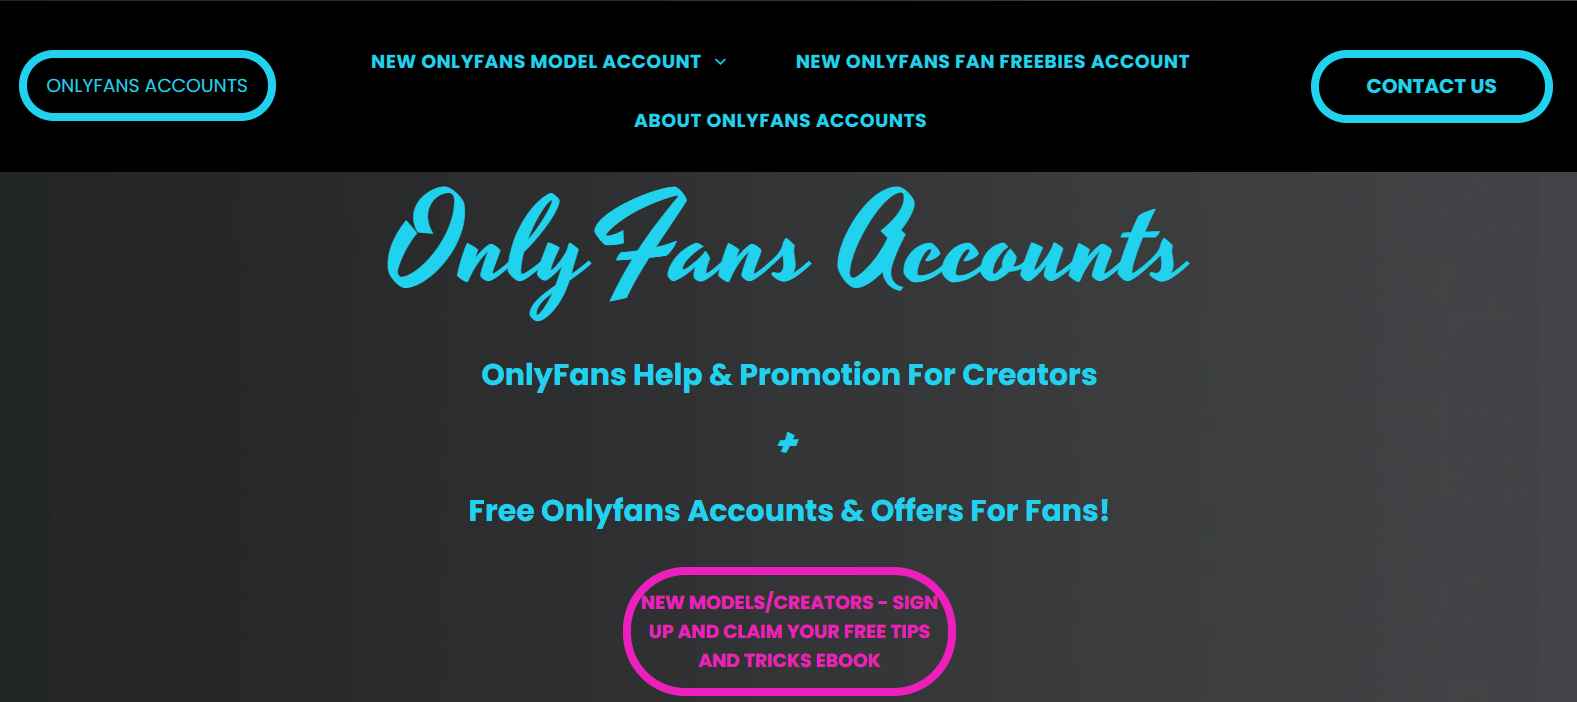 How to promote onlyfans 2022